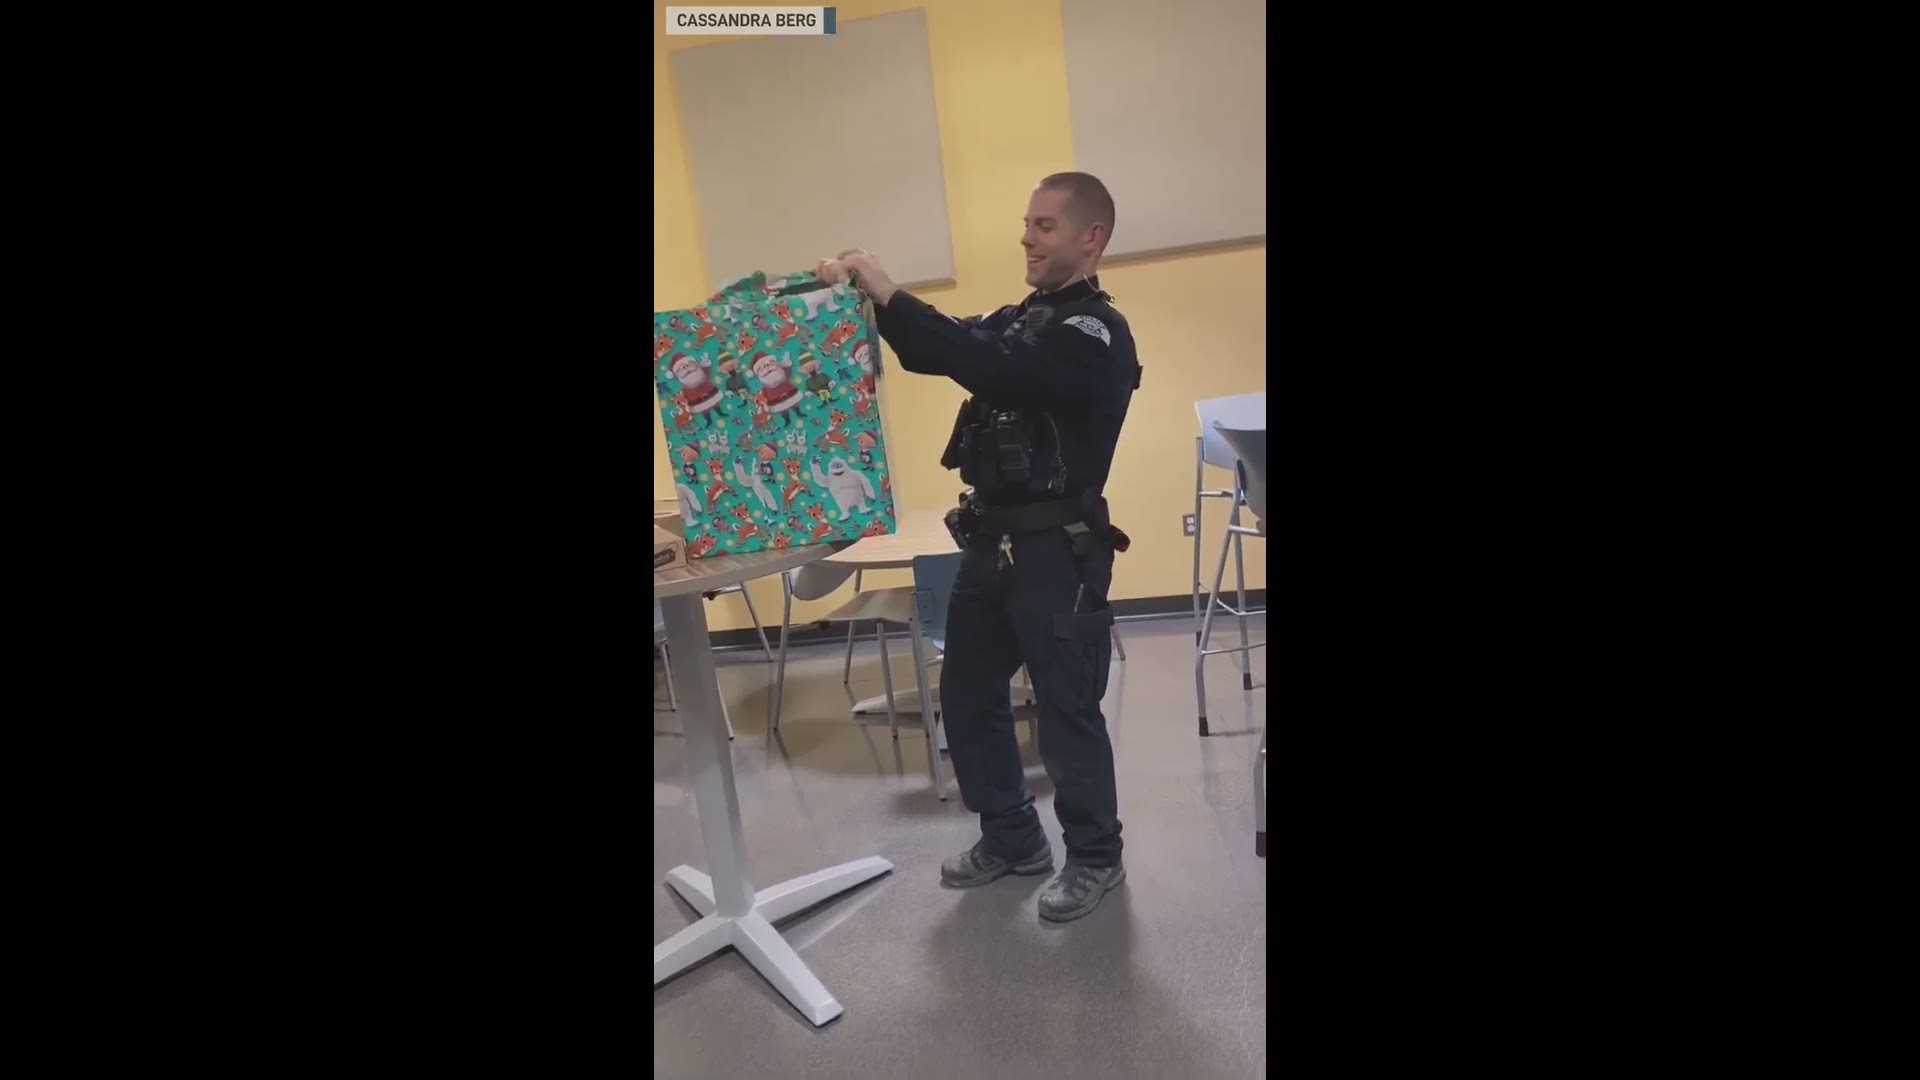 Officer Madsen received the gift from a family whose lives he touched. His K-9 Officer Lemon passed away in December after a medical crisis. (Video: Cassandra Berg)